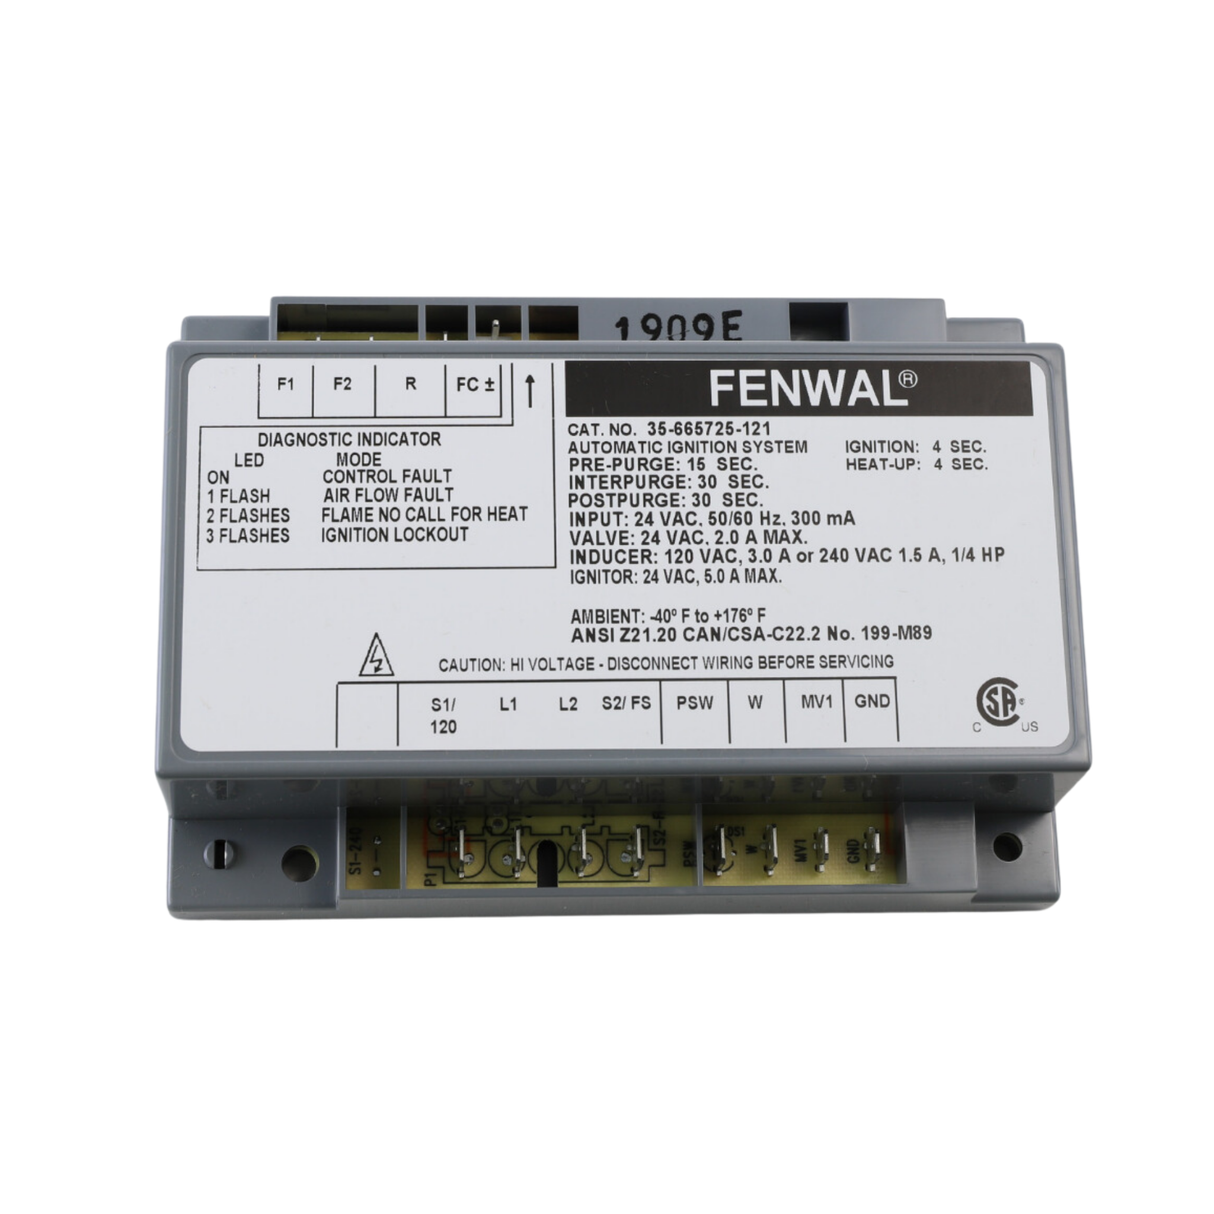 Fenwal 35-665725-121 24V, 15s Pre-Purge, 30s Inter-Purge, 4s Ignition Time, Automatic Ignition System